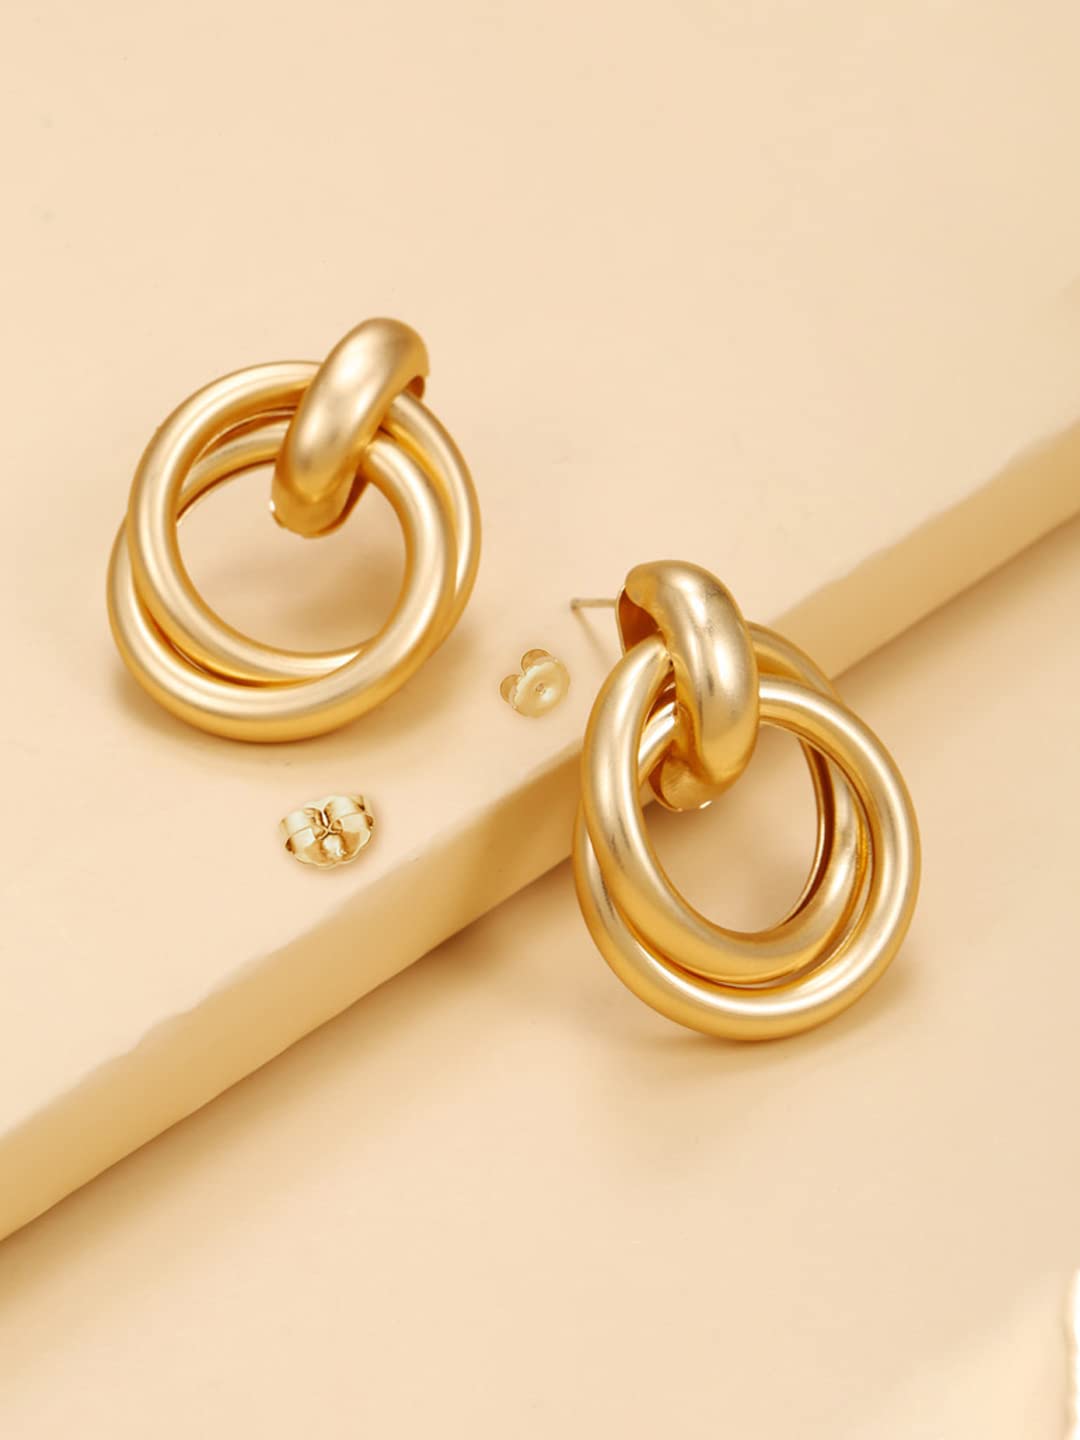 Yellow Chimes Earrings For Women Gold Plated Twisted Layered Circle Hoop Stud Earrings For Women and Girls